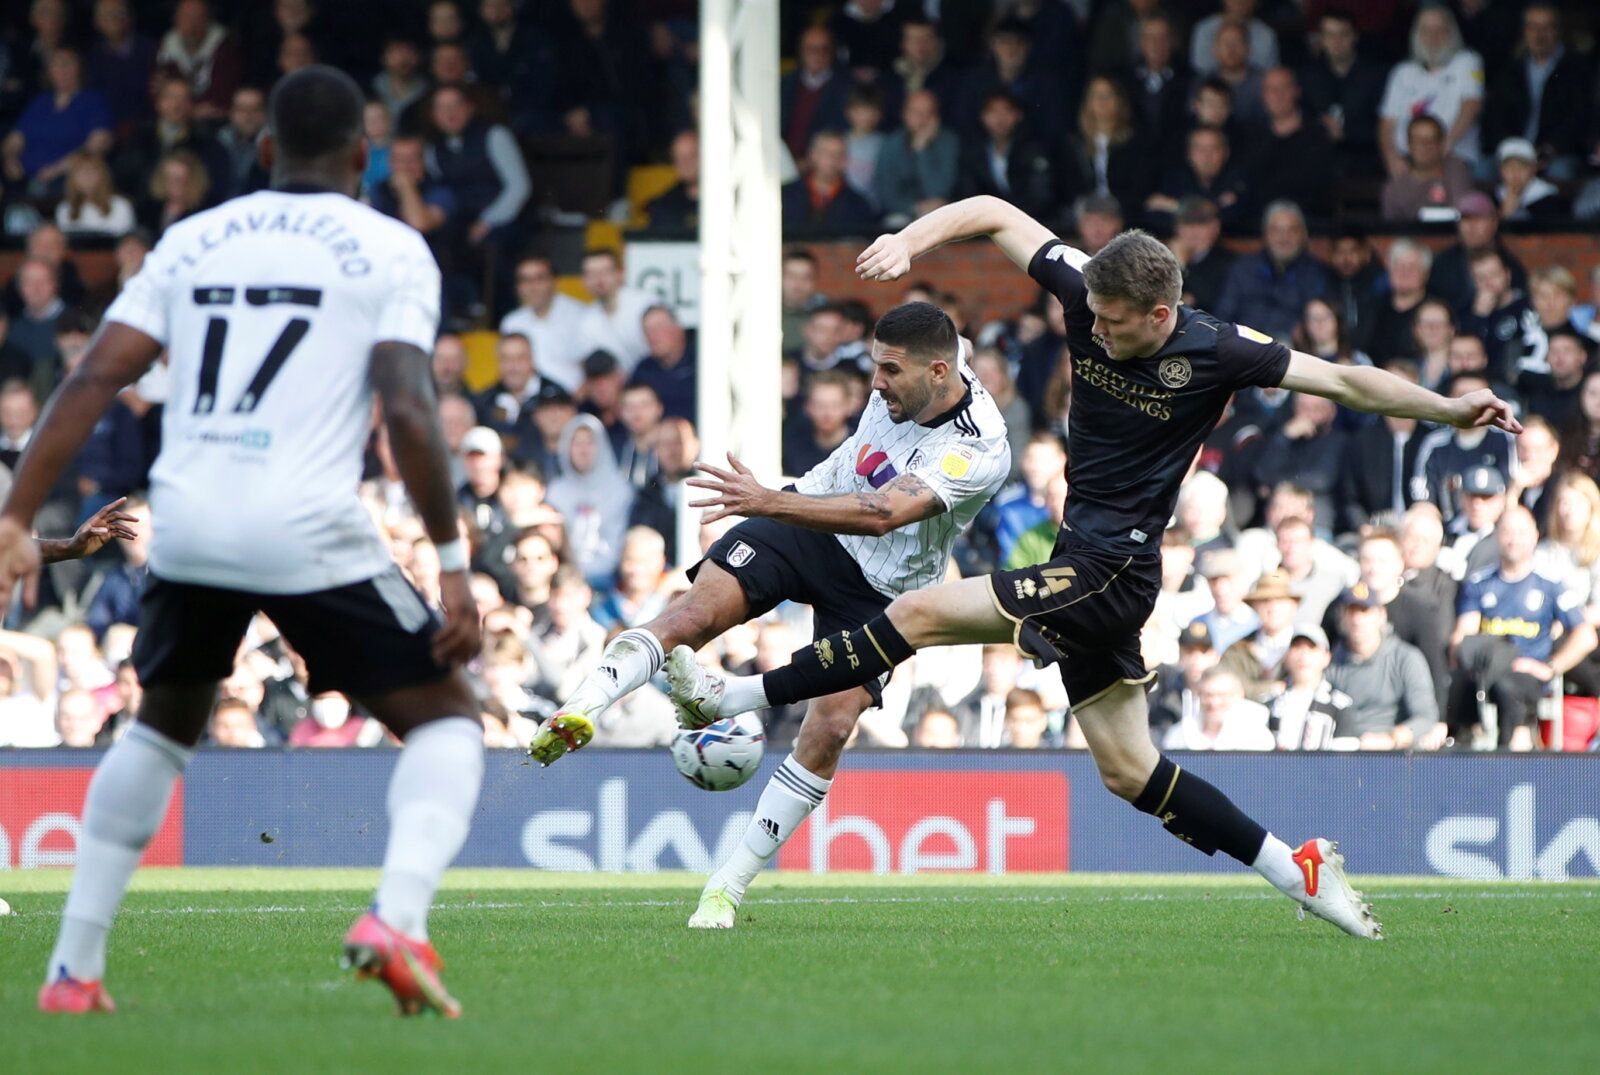 Soccer Football - Championship - Fulham v Queens Park Rangers - Craven Cottage, London, Britain - October 16, 2021  Fulham's Aleksandar Mitrovic scores their first goal  Action Images/Paul Childs  EDITORIAL USE ONLY. No use with unauthorized audio, video, data, fixture lists, club/league logos or 